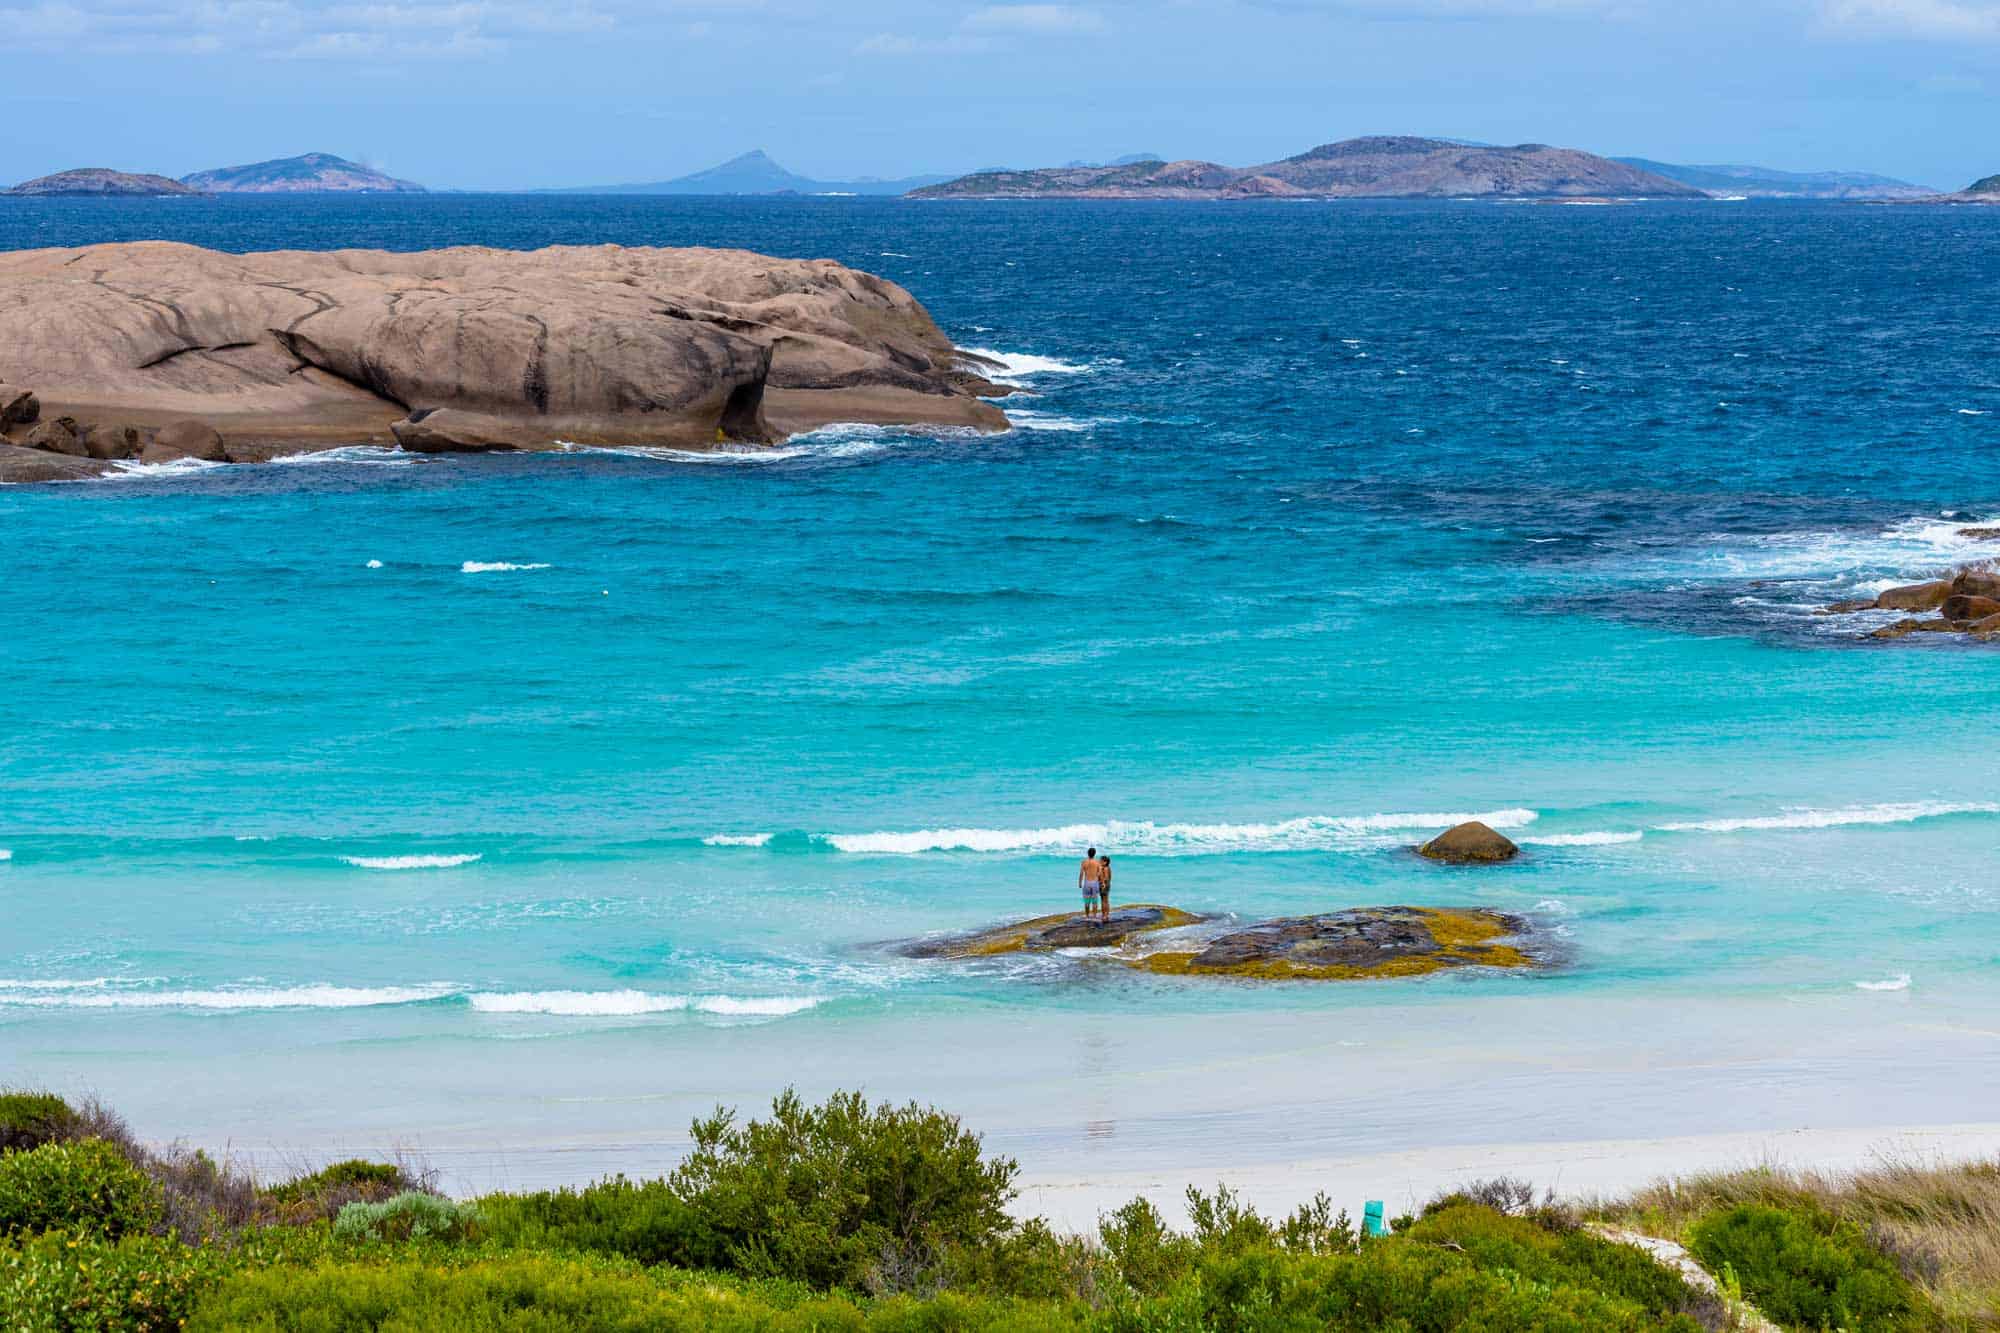 15 EPIC Things to Do in Esperance (2022 Guide)